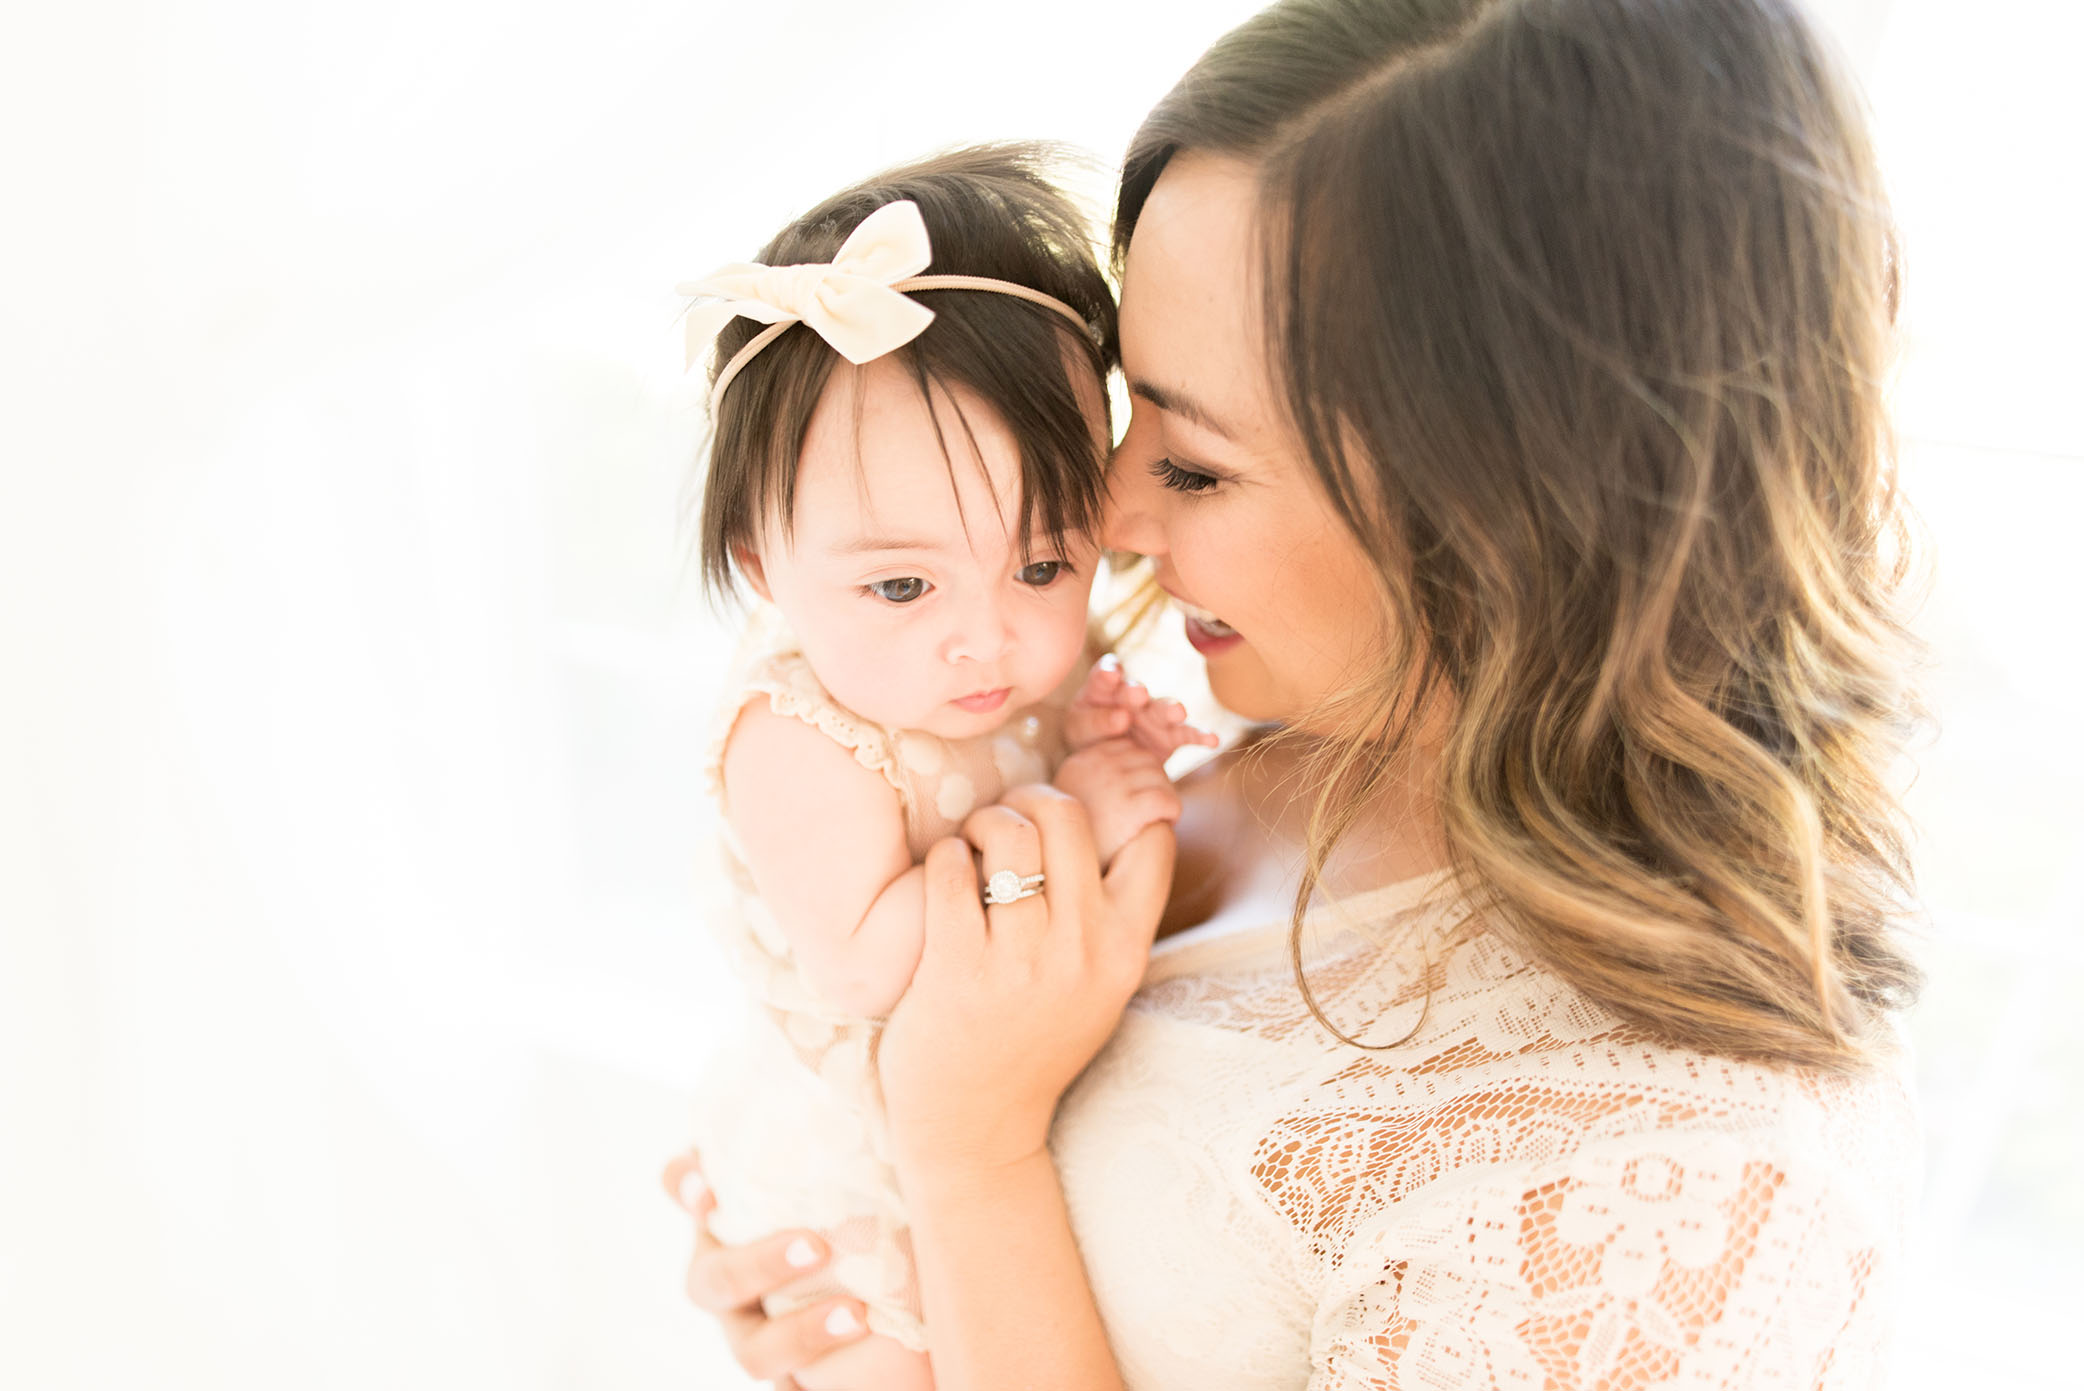 The sweetest baby and mommy captured by Sweet Beginnings Photography by Stephanie